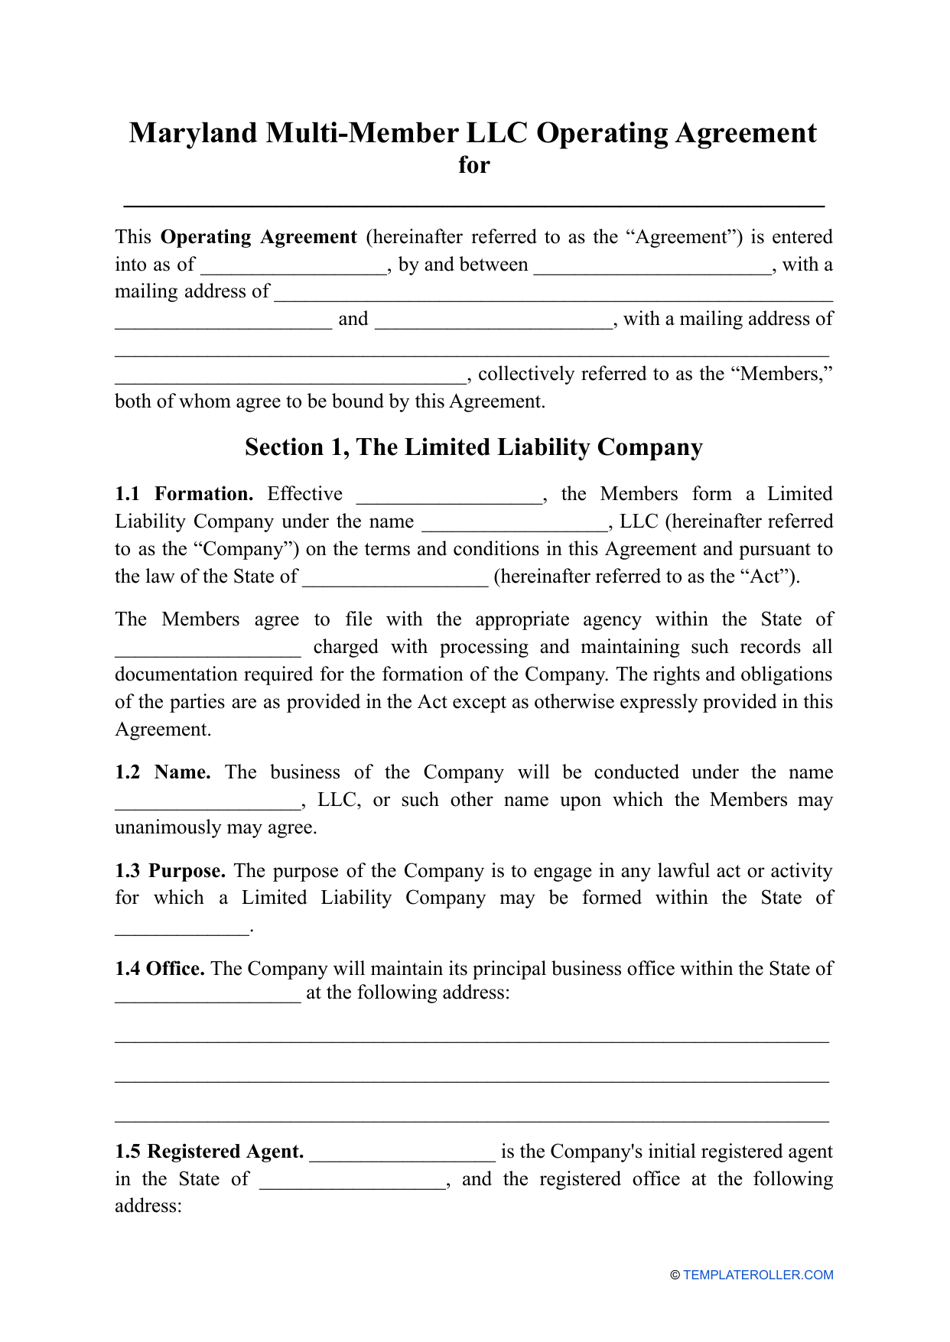 Multi-Member LLC Operating Agreement Template - Maryland, Page 1